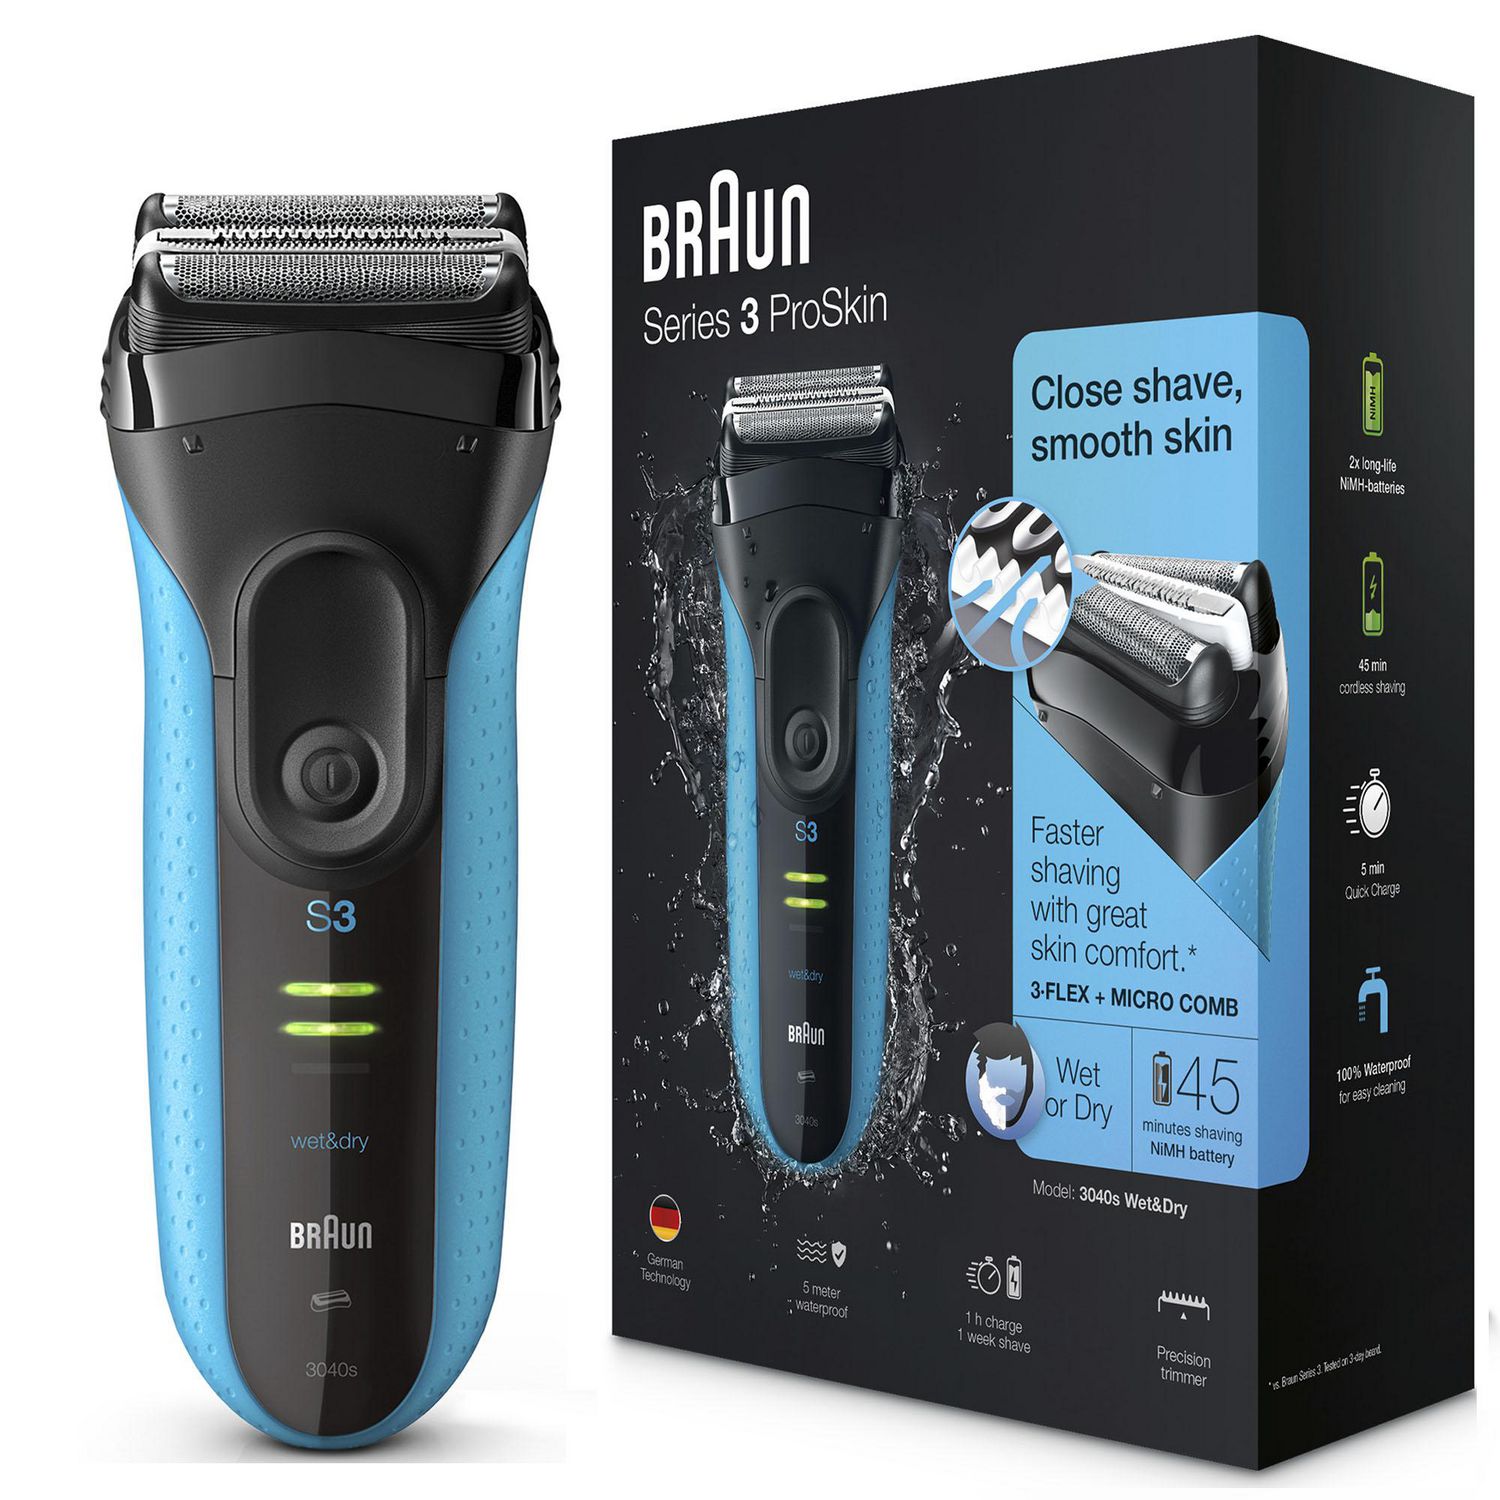 Braun Series 3 Electric Men, Shave&Style Black/Blue, 1 Razor and for Proskin Dry 3-in-1 Shaver, Wet Set